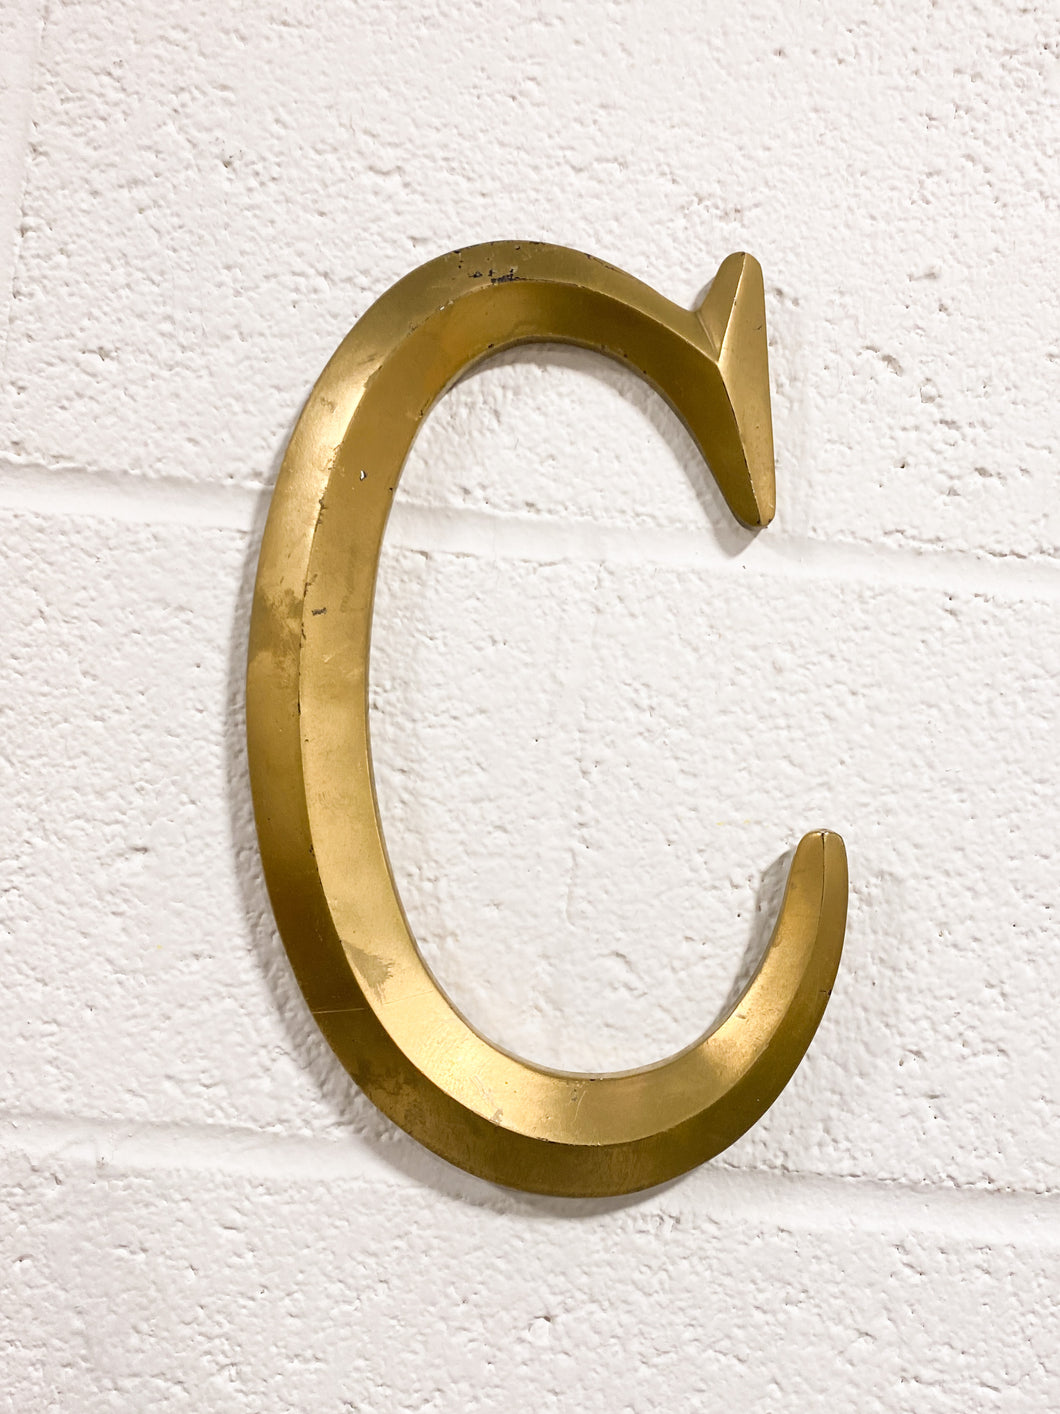 Gold “C” Wooden Wall Hanging